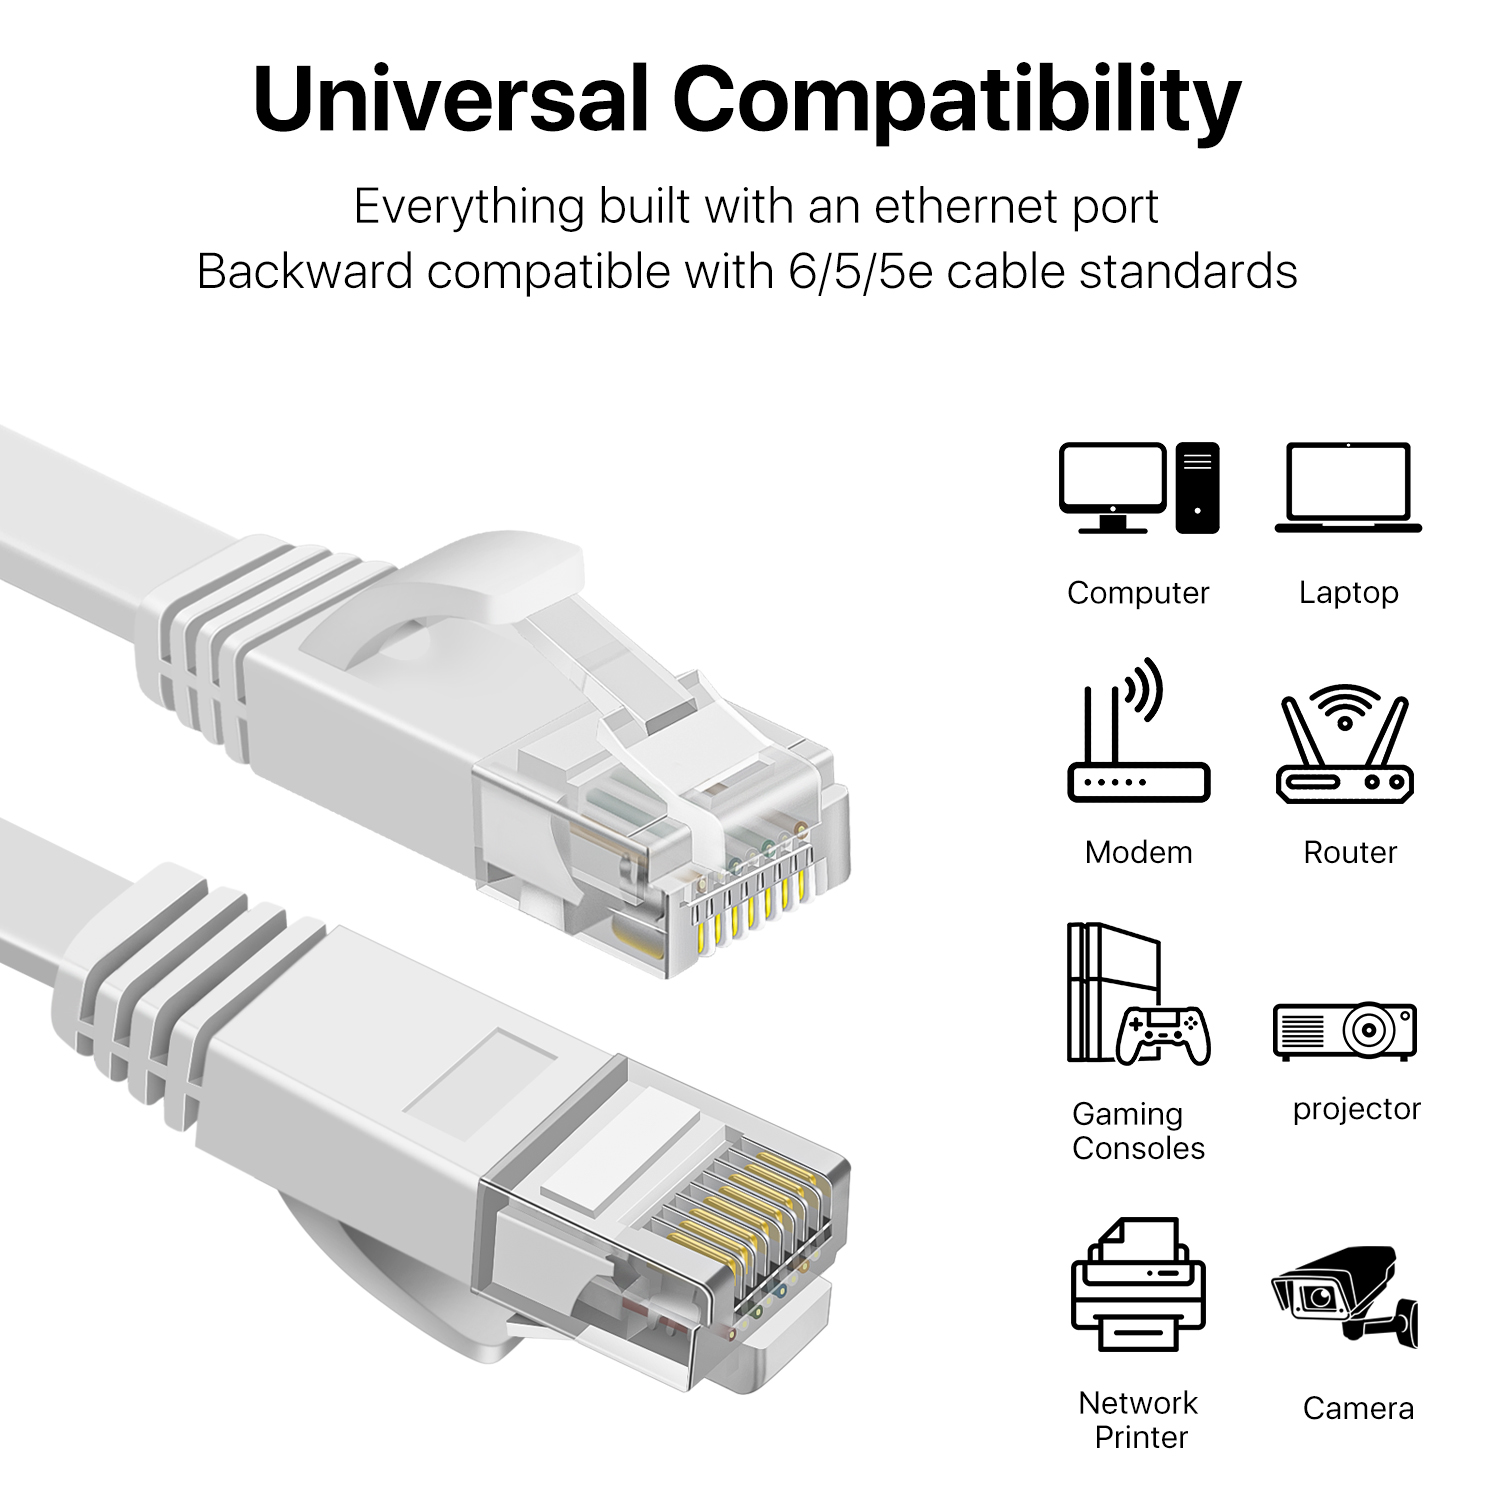 Ethernet Cable Cat 6 Flat Cable, Cat 6 Ethernet Cable 100 ft, Flat Wire Cat6 Ether Network Internet Cord - RJ45 Cable LAN Internet Ethernet Patch Cables Connector (White) - image 3 of 7